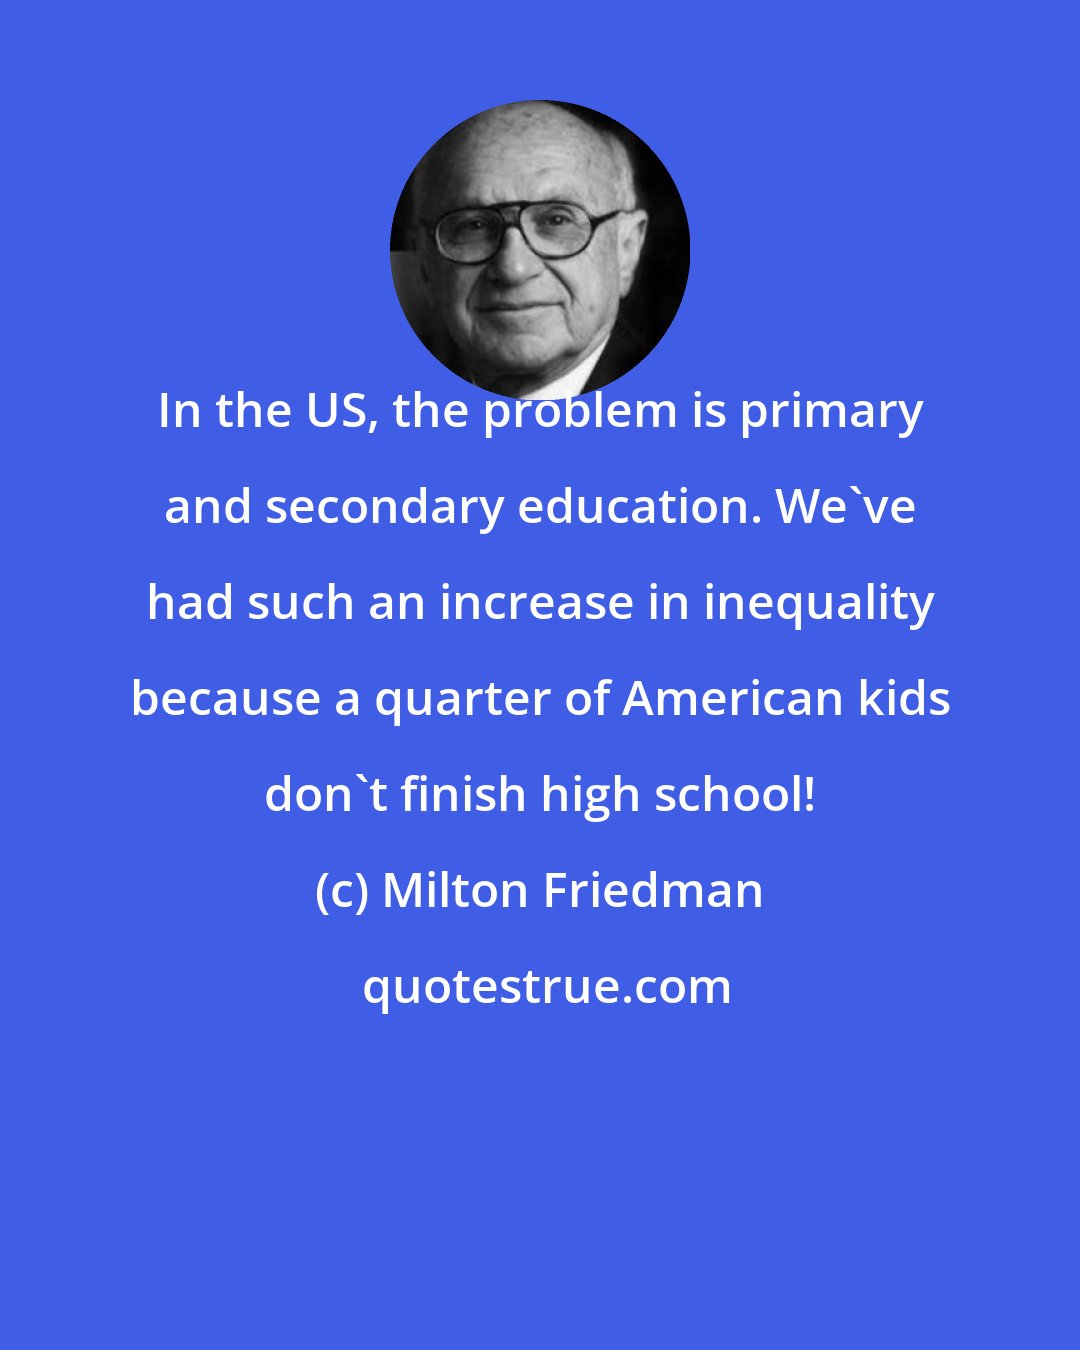 Milton Friedman: In the US, the problem is primary and secondary education. We've had such an increase in inequality because a quarter of American kids don't finish high school!